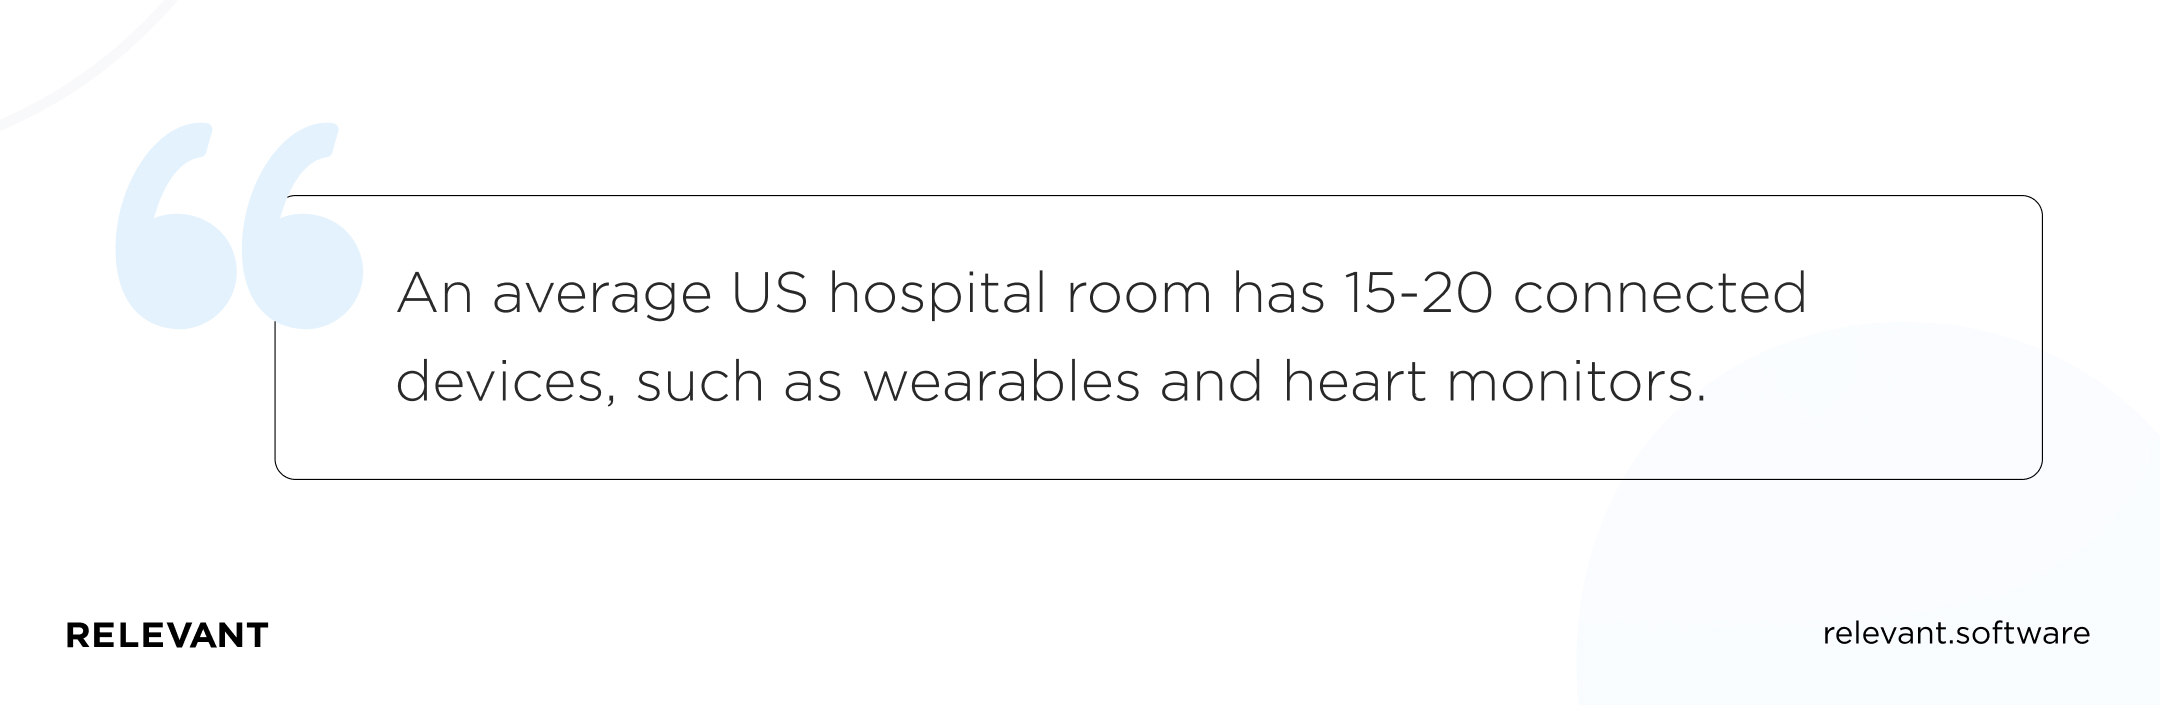 An average US hospital room has 15-20 connected devices, such as wearables and heart monitors.